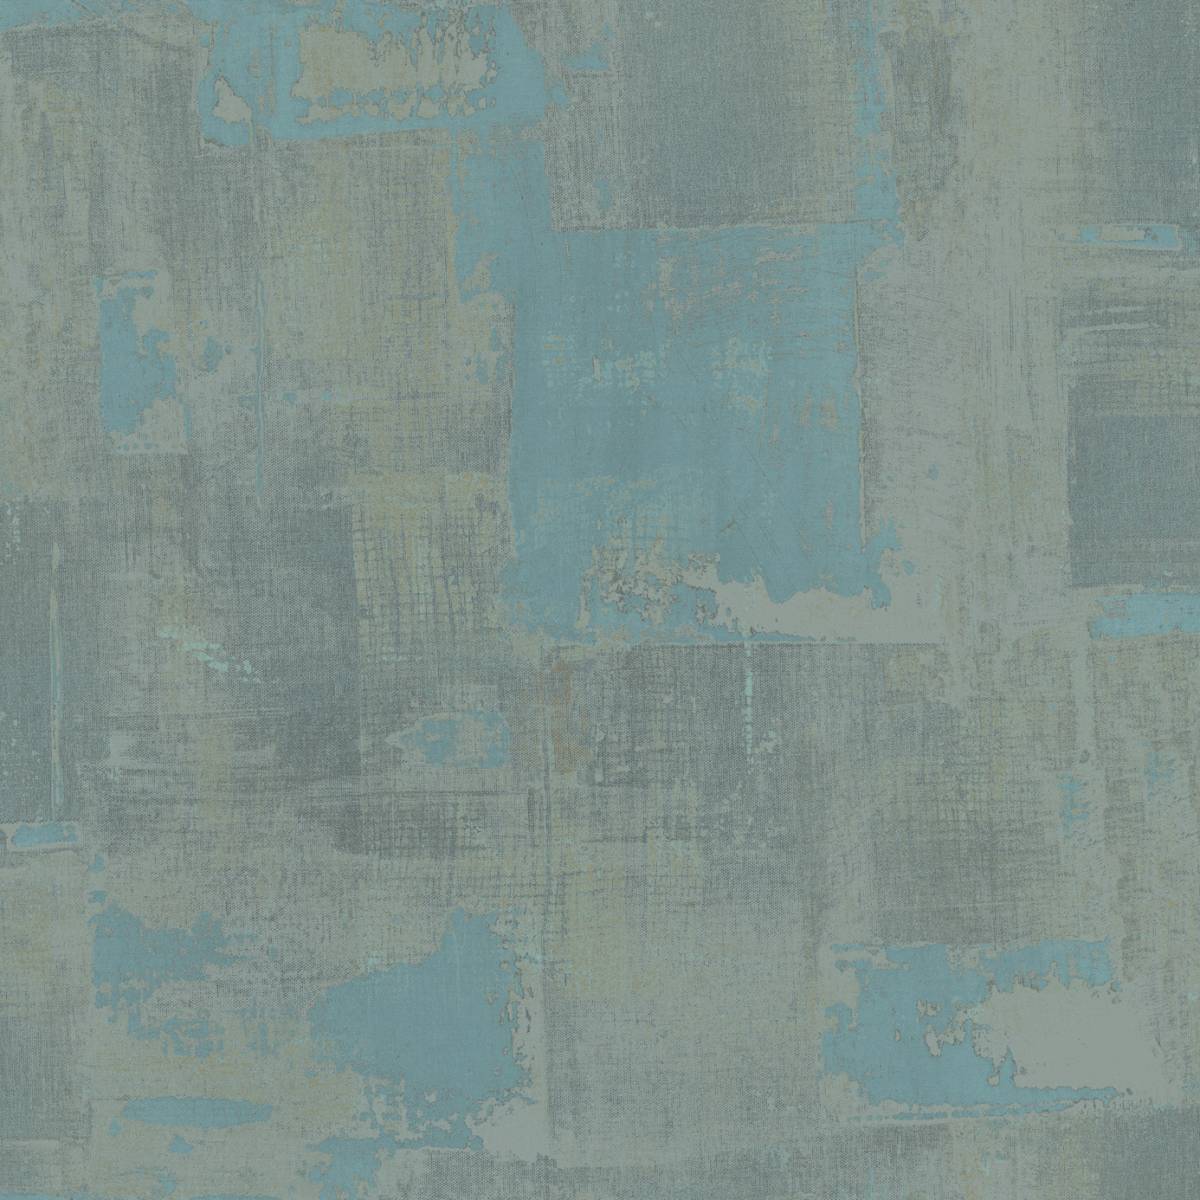 Matiere Wallpaper - Turquoise (29176127) - Casadeco Oxyde Wallpapers ...